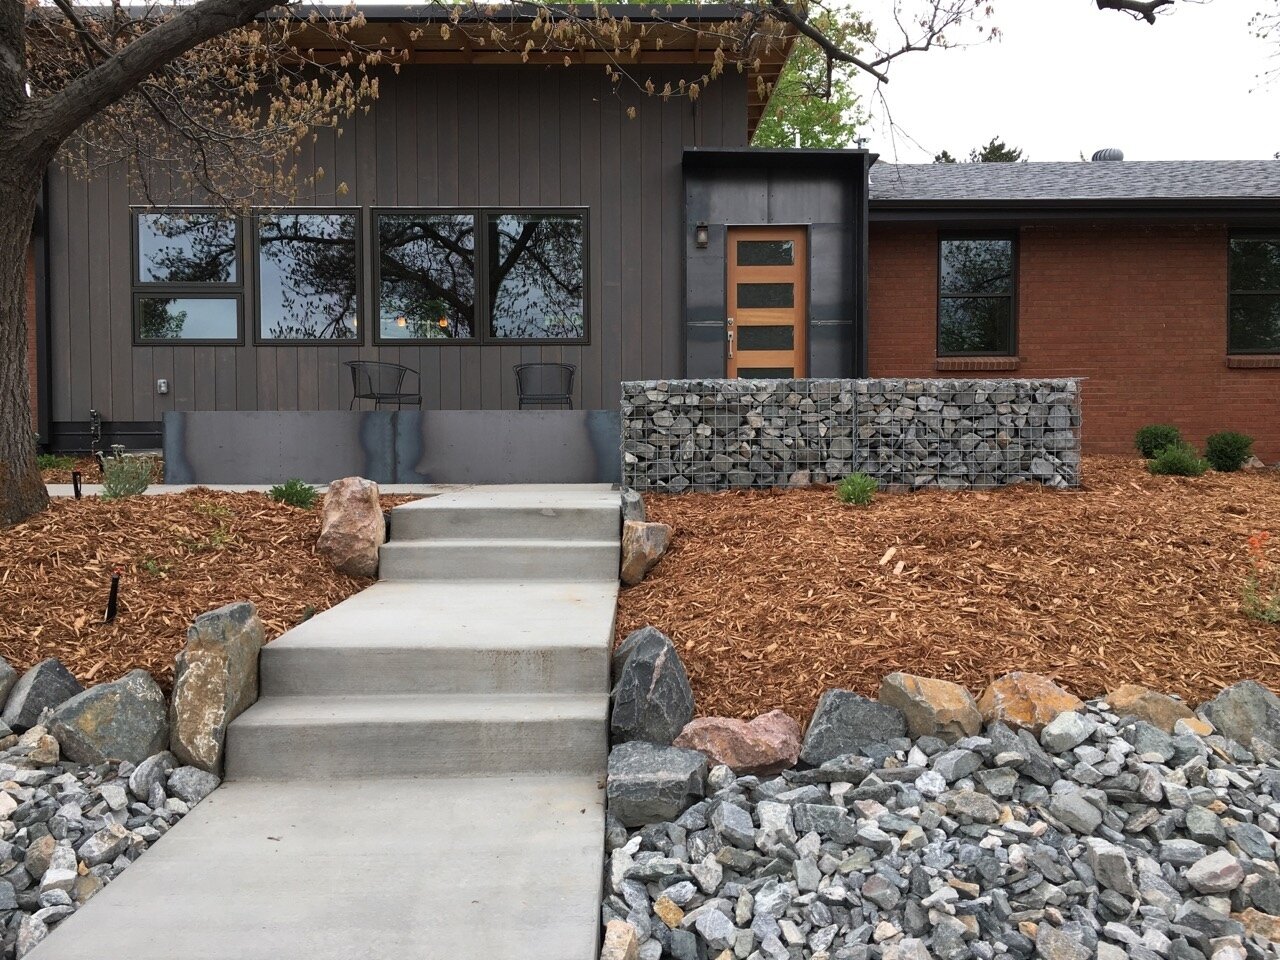 Sometimes you just gotta cut the middle of an old ranch home out and make it mod. ⁠
⁠
Check out more photos of our Goldenvue project on our website!⁠
⁠
#makeitmod #modpod #moderndesign #modernliving #mountainhome #coloradohome